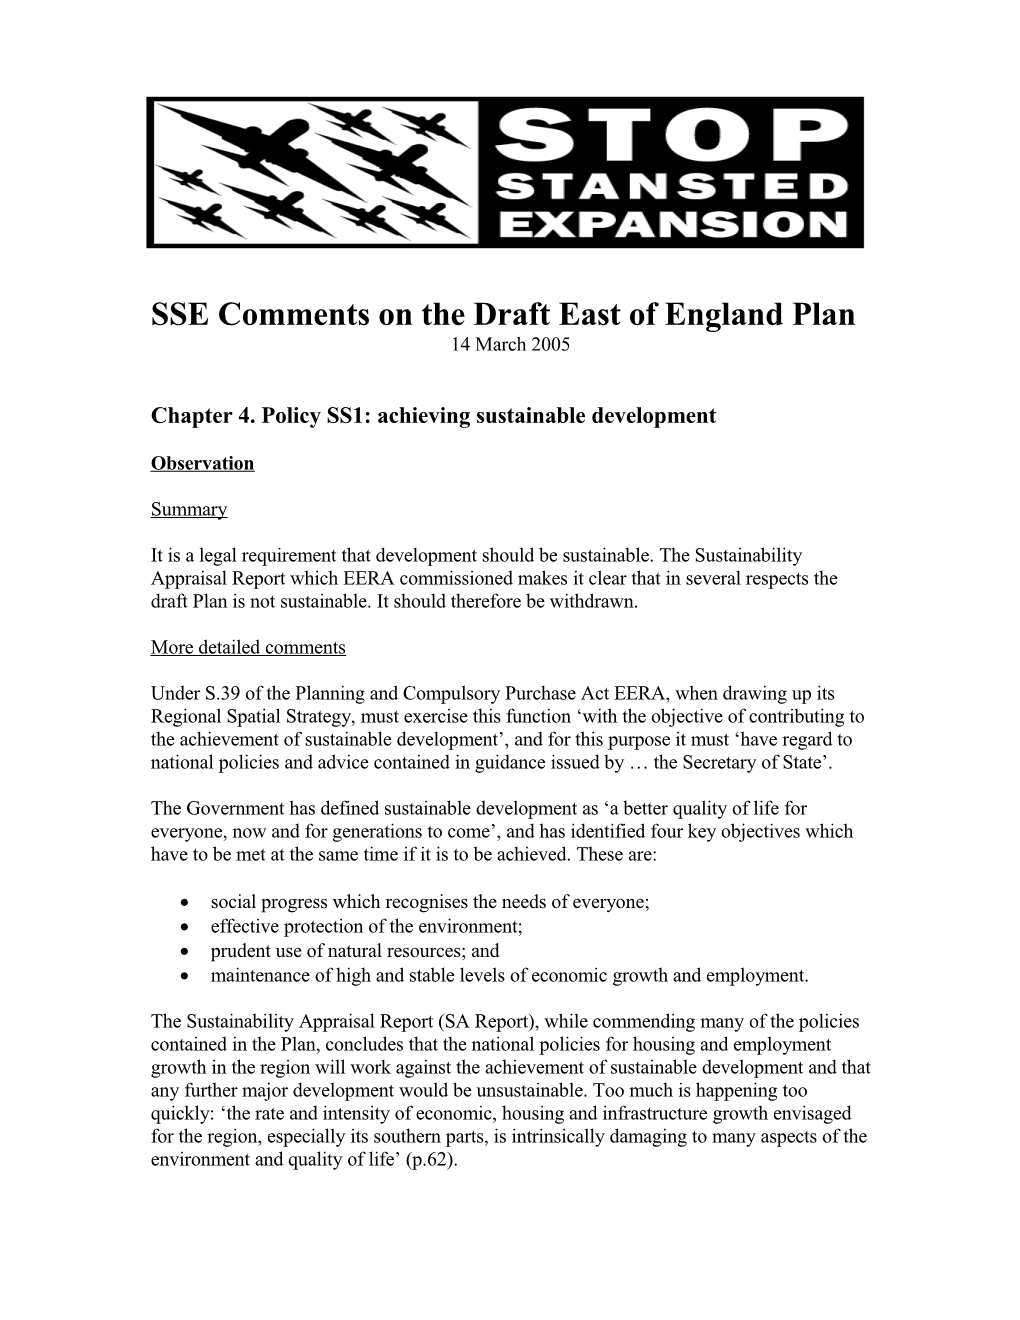 Sse S Comments on the Draft East of England Plan: 10 Feb 2005